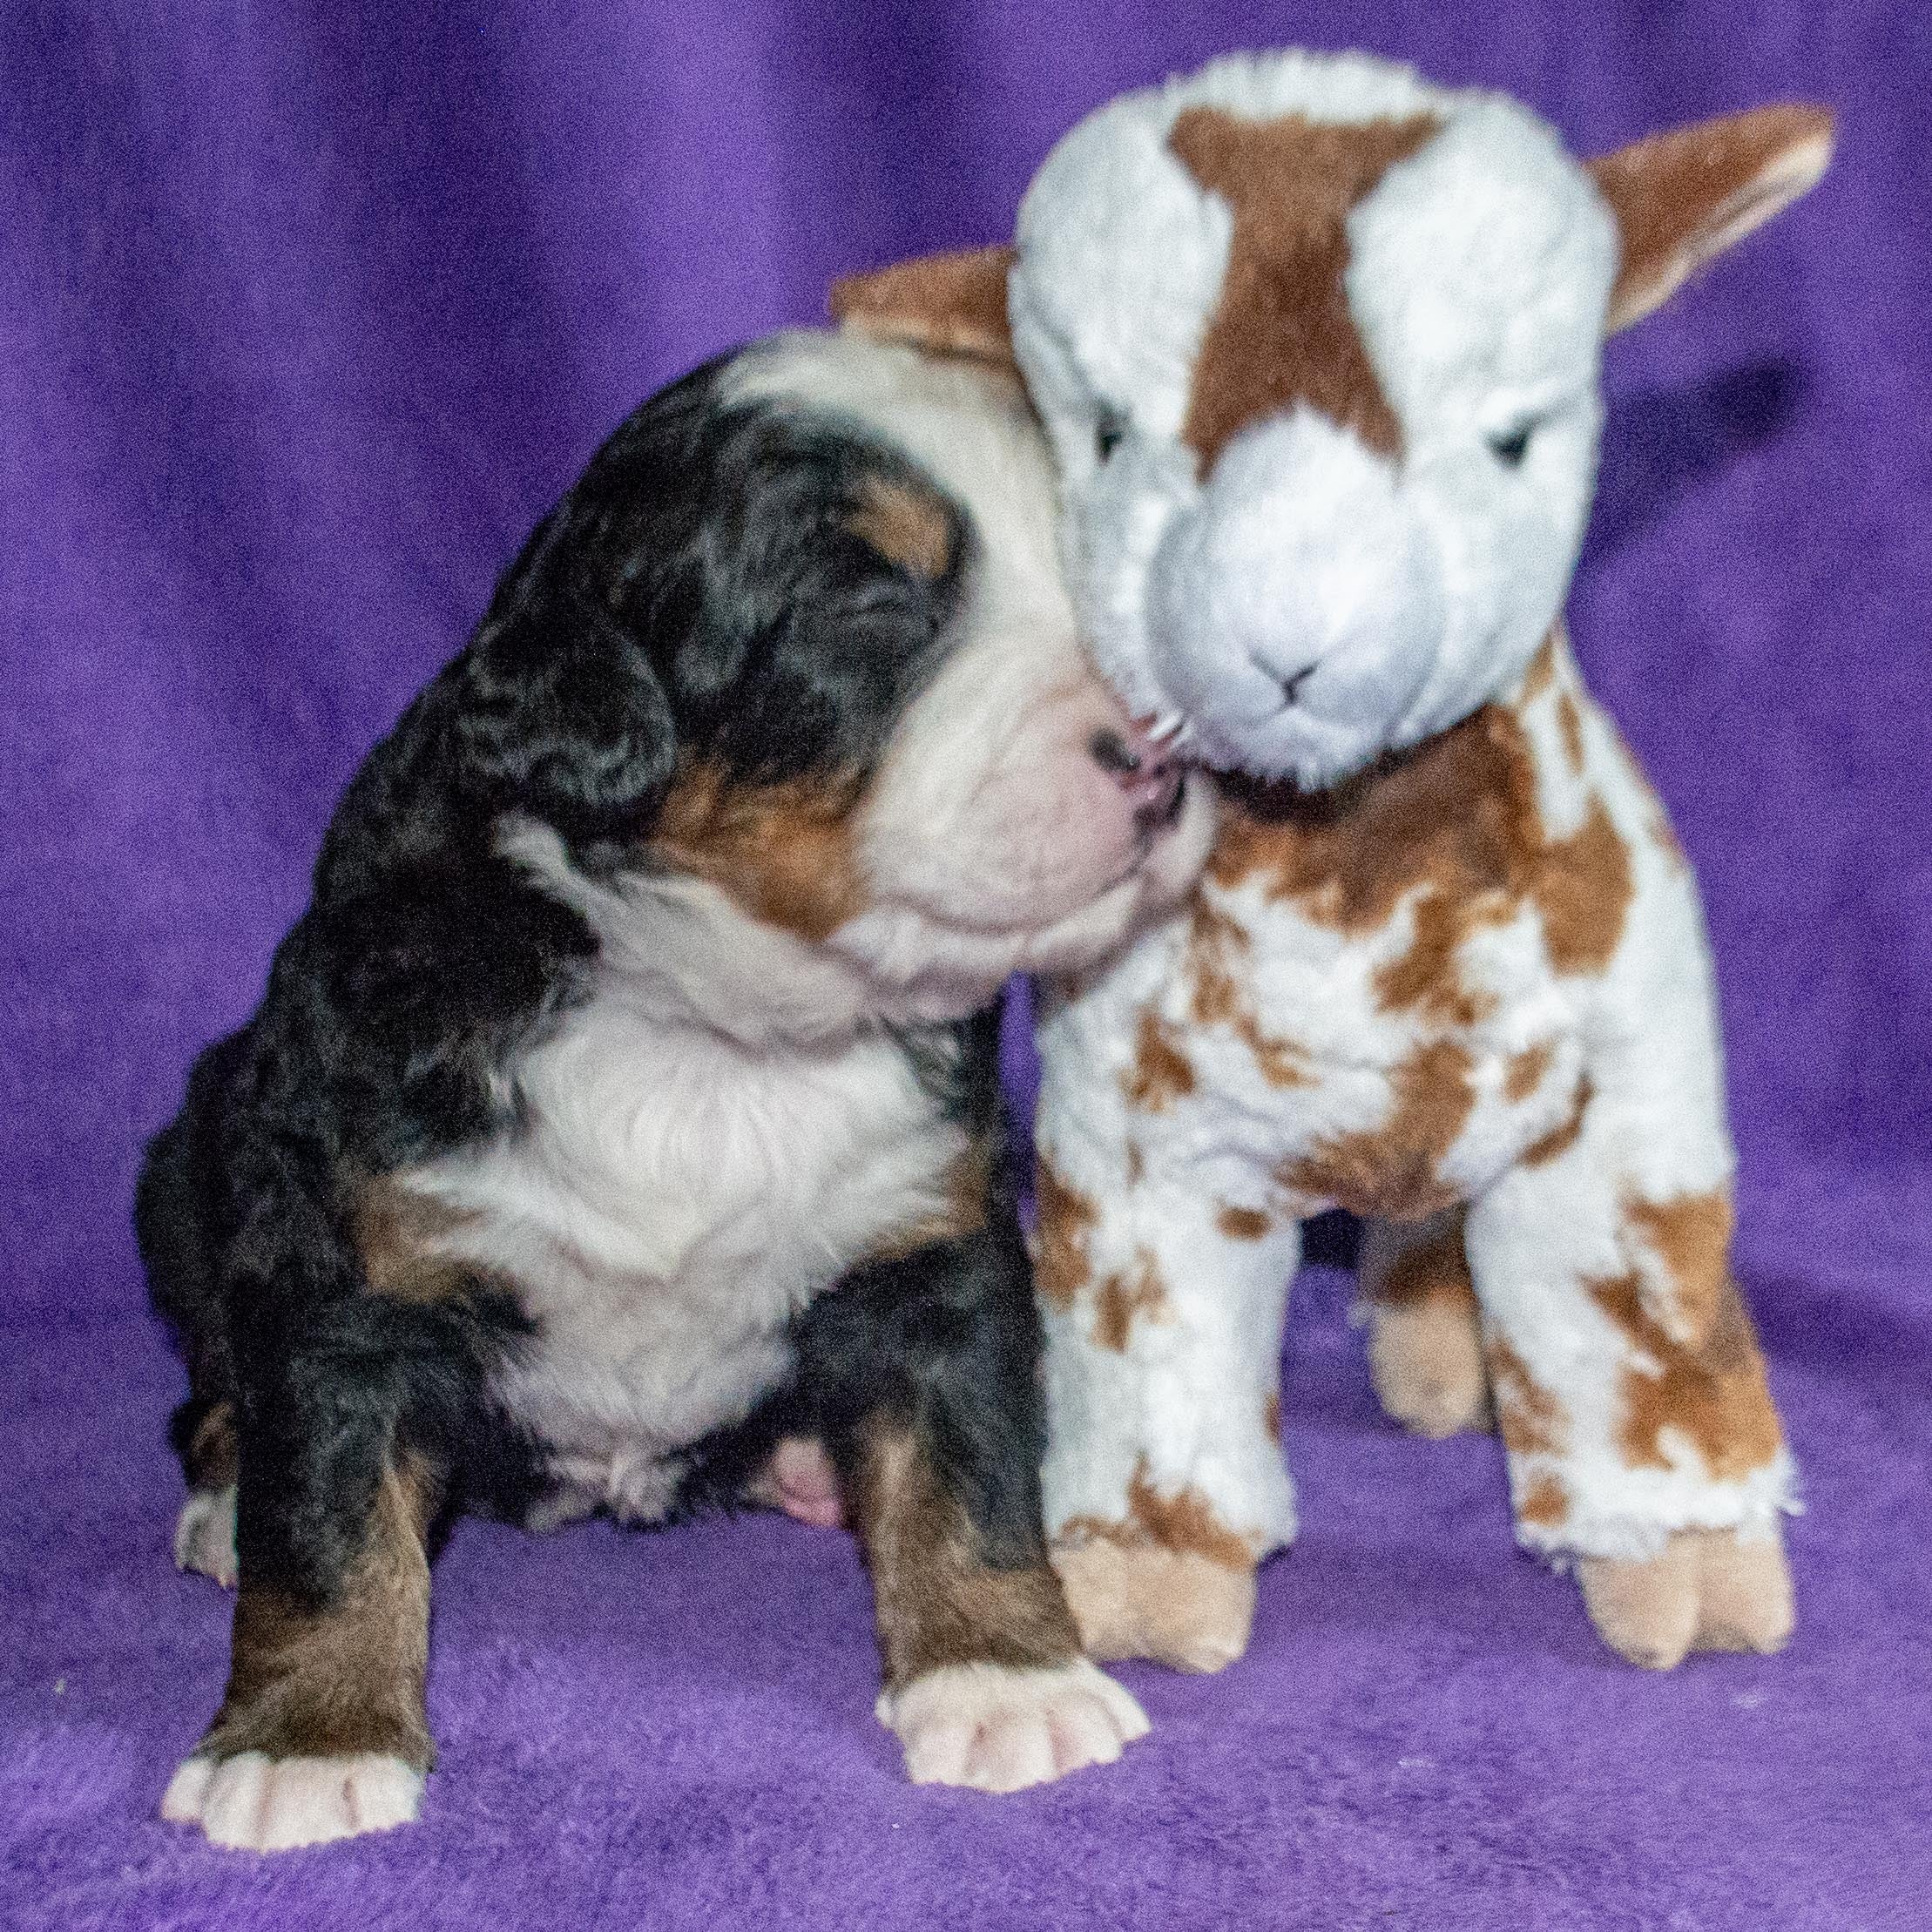 Pendragon the Male Bernese Mountain Dog Puppy Camelot January With Stuffed Animal Baby Goat Toy